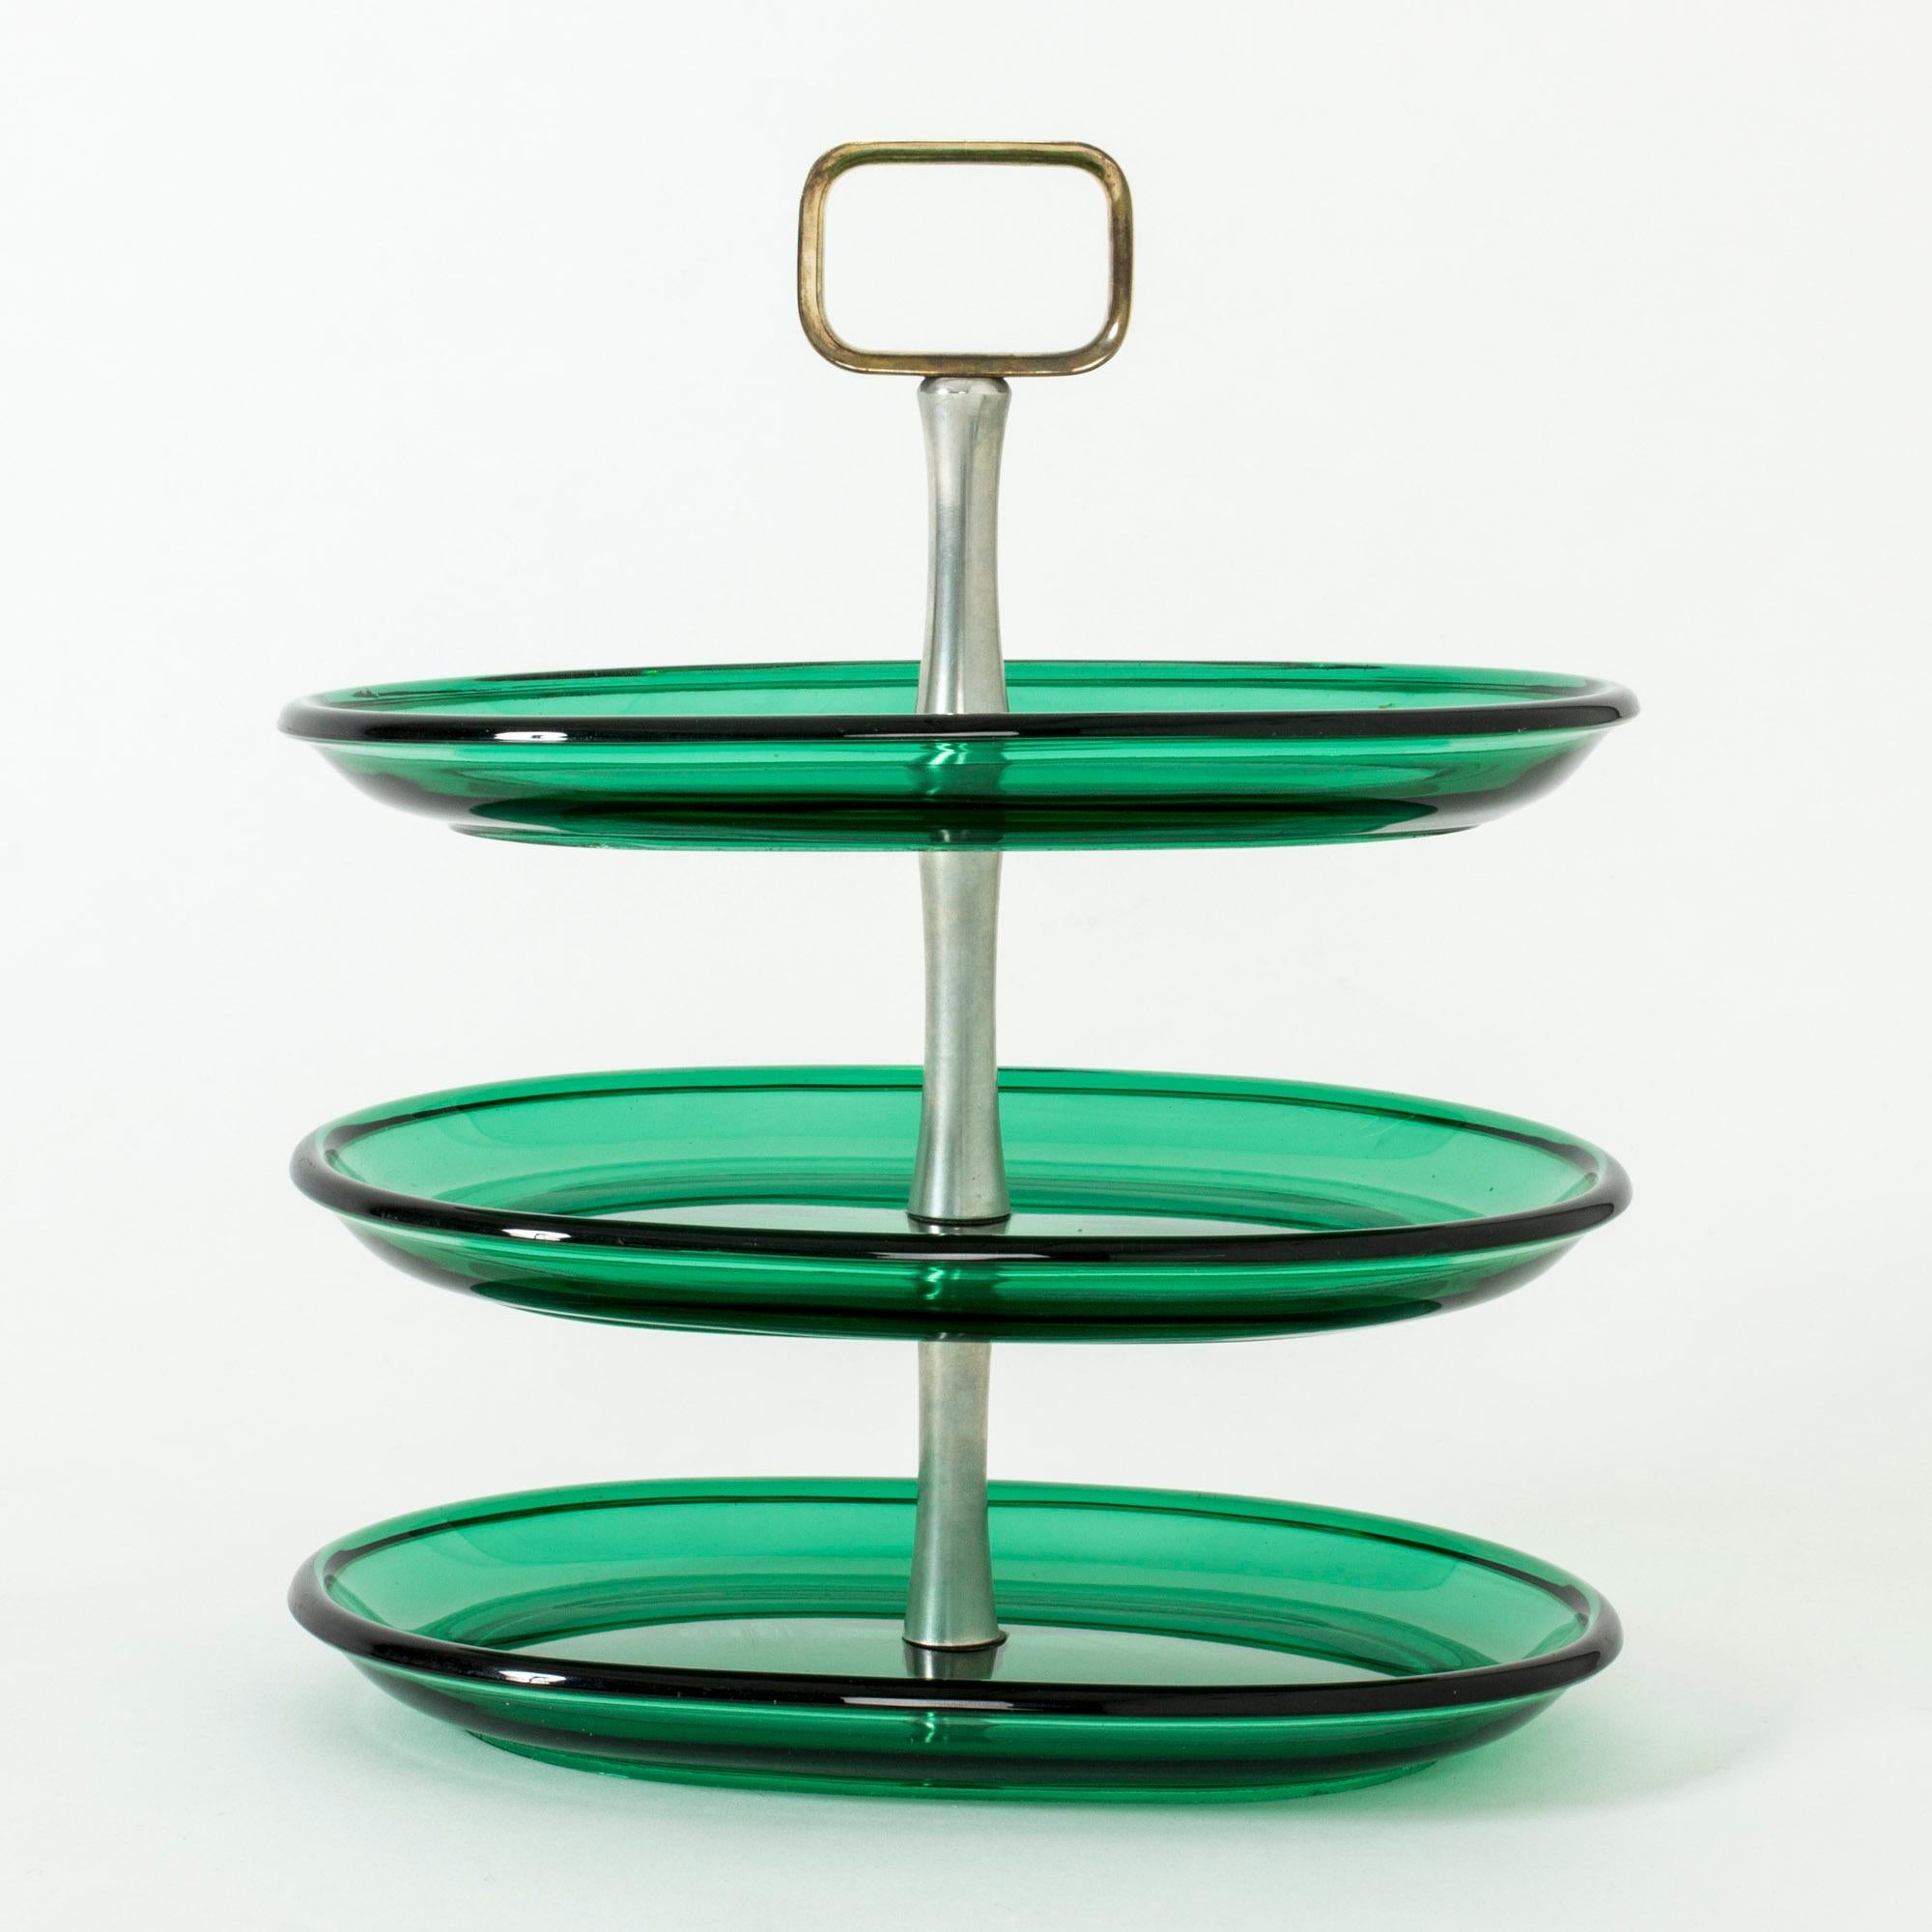 Beautiful cake stand with three stories by Josef Frank. Oval trays in thick, vibrant green glass. Handle made from steel with a large, brass handle. Clean lines and beautiful combination of materials.